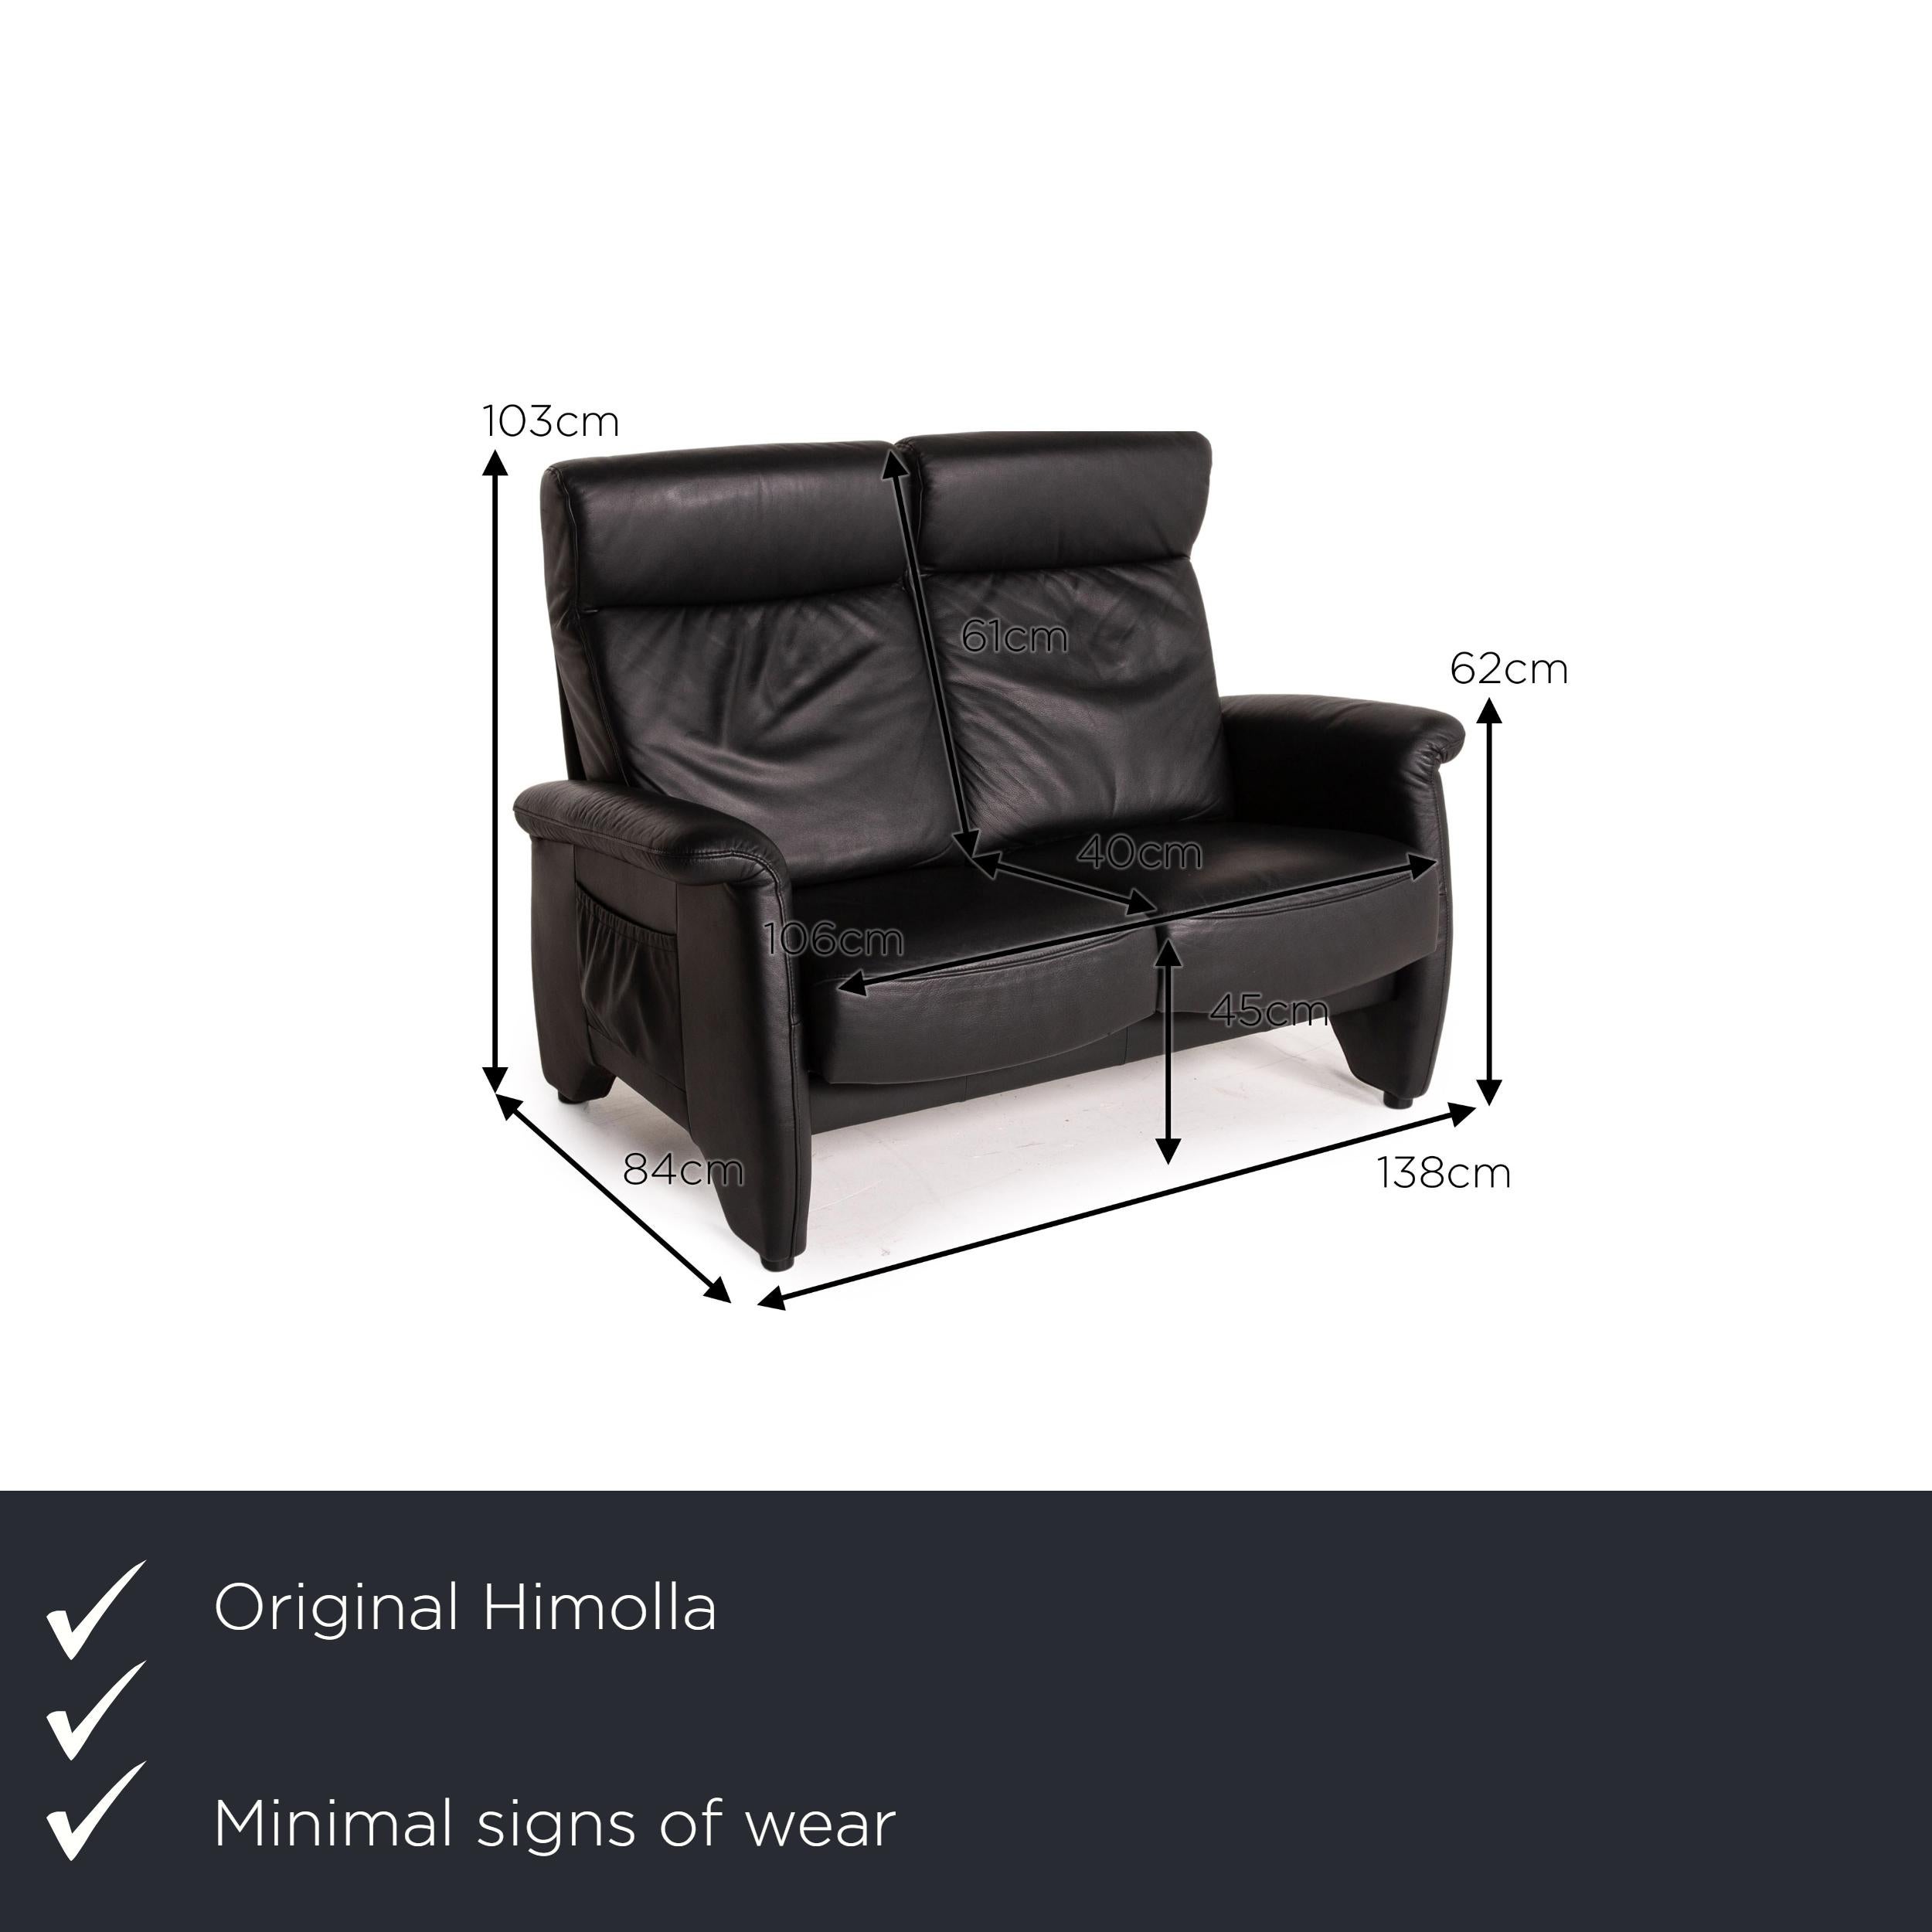 We present to you a Himolla Ergoline leather sofa black two-seater function couch.
  
 

 Product measurements in centimeters:
 

 depth: 84
 width: 138
 height: 103
 seat height: 45
 rest height: 62
 seat depth: 40
 seat width: 106
